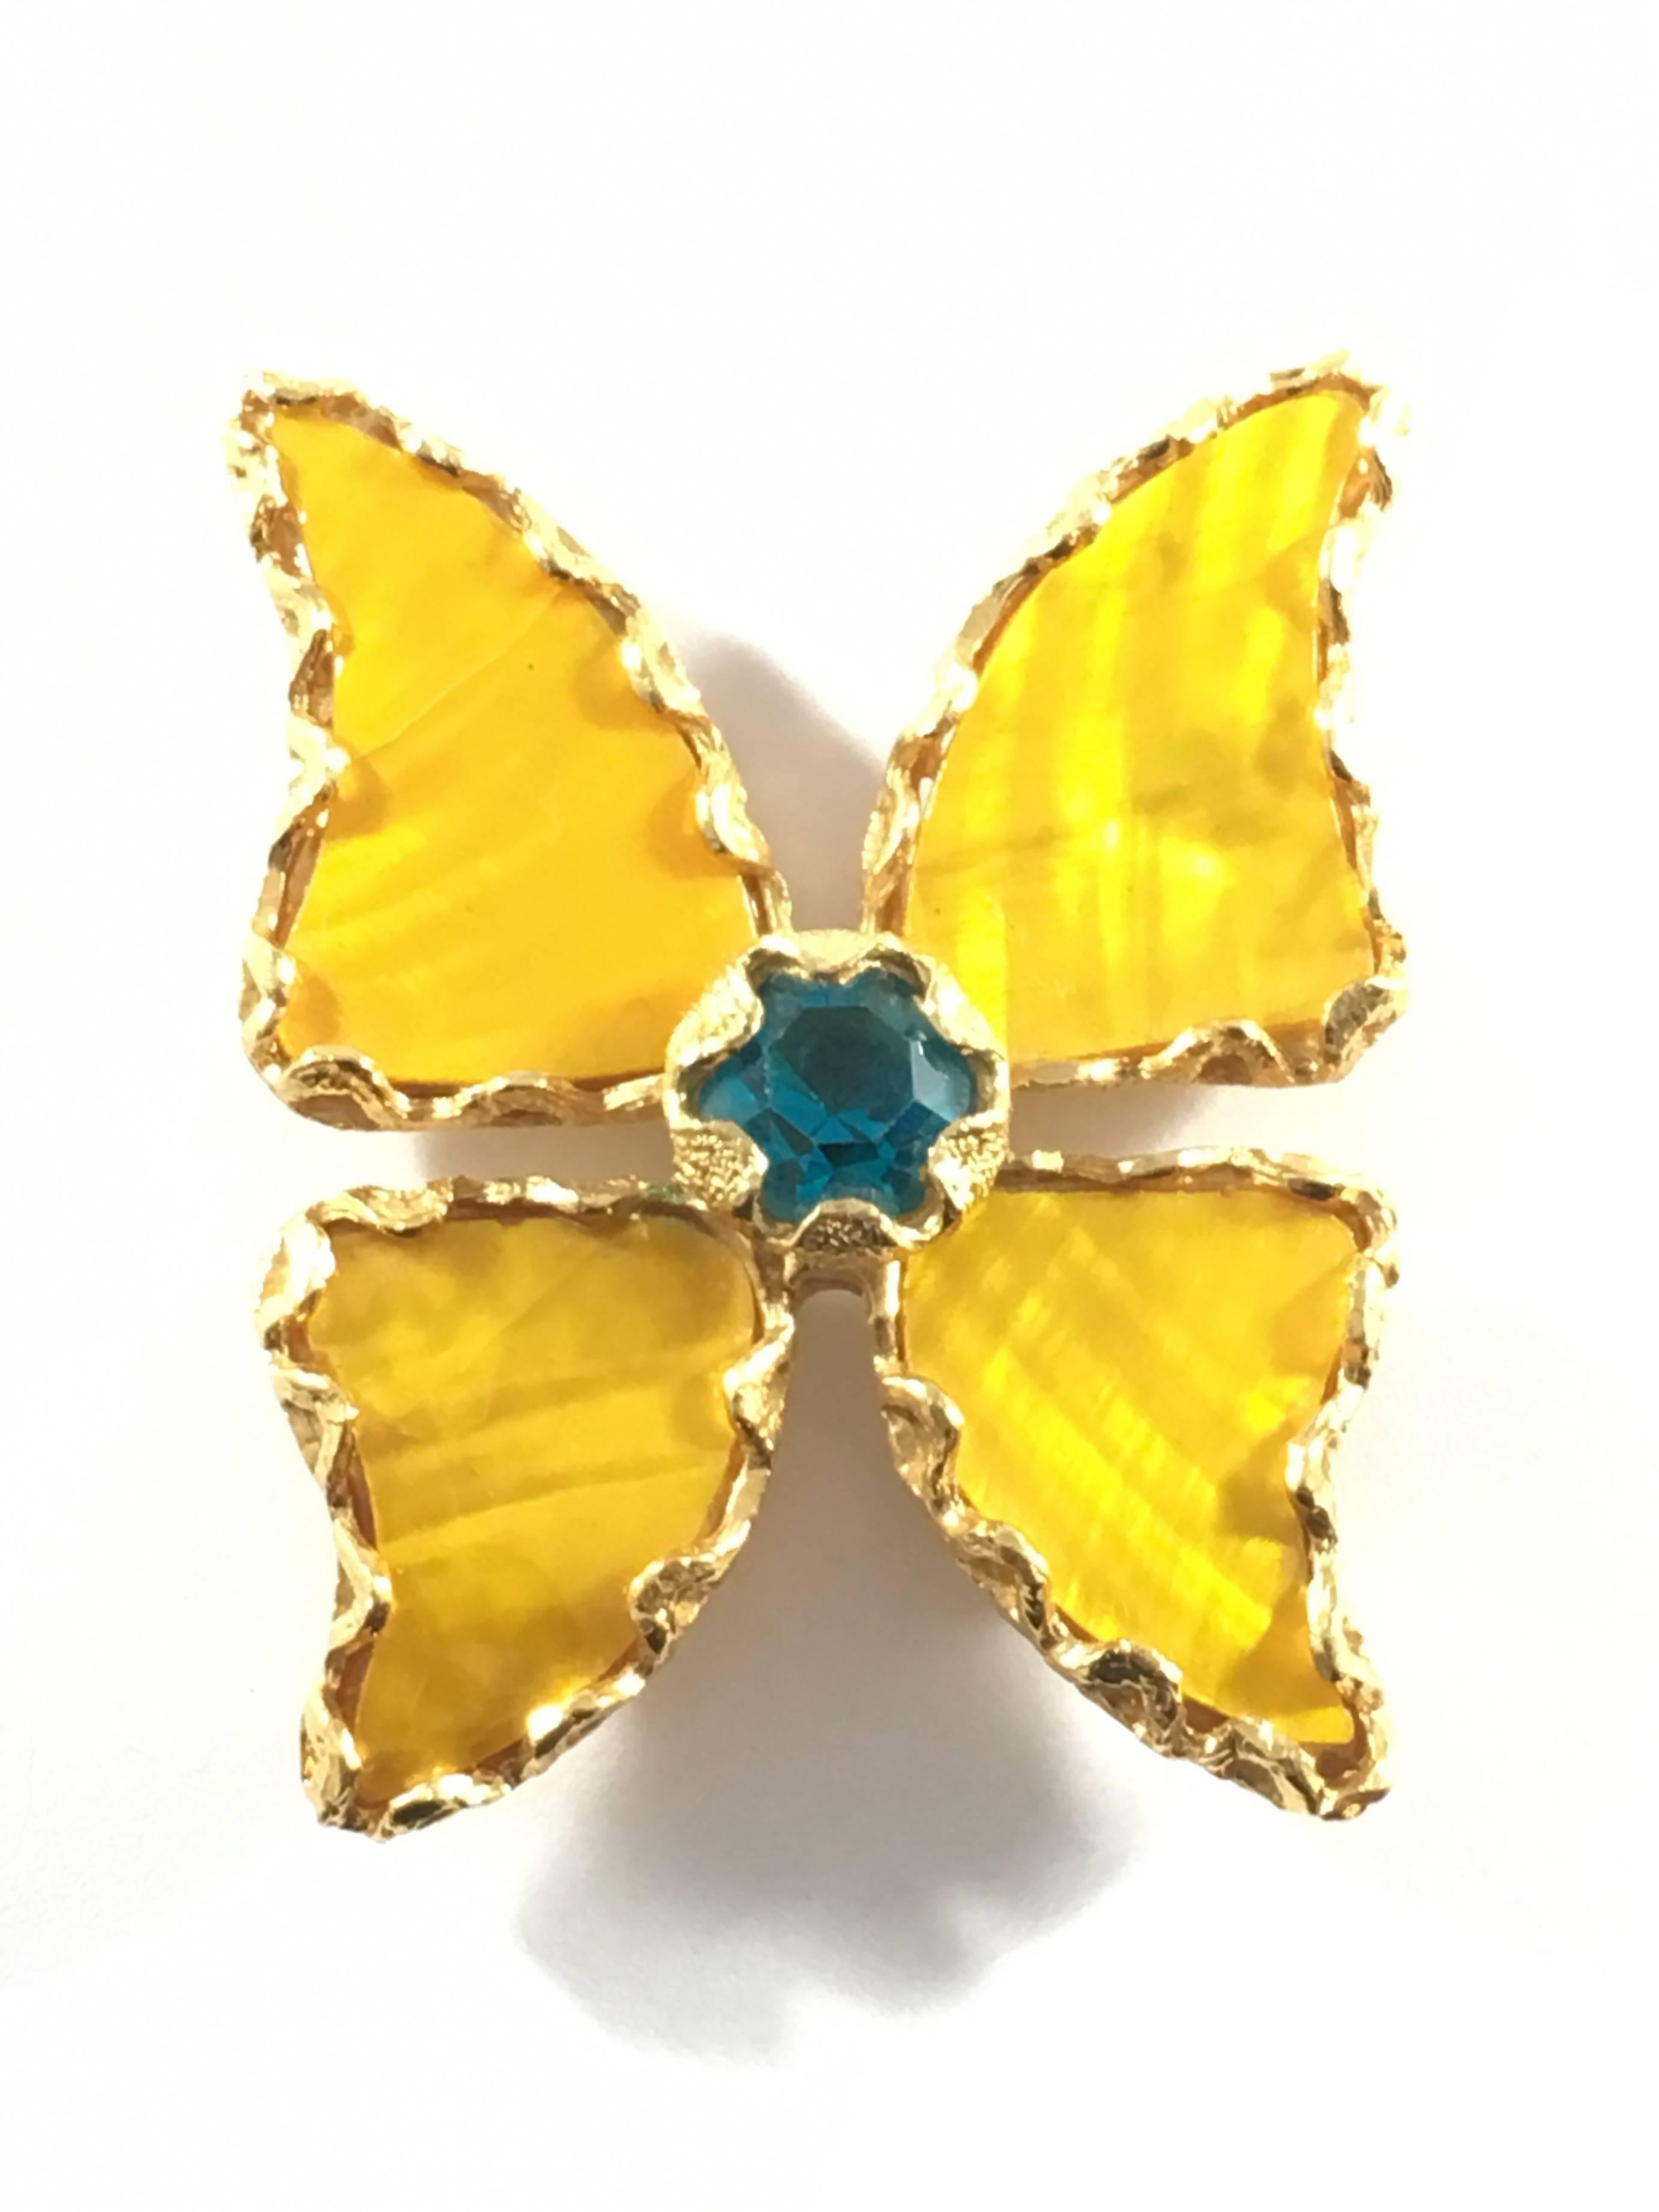 This is a beautiful butterfly brooch from Yves Saint Laurent. It was made for their high-end line, 'Rive Gauche'. The wings are made of very thin yellow shell pieces that have a shimmering mother-of-pearl effect. The center of the butterfly has a